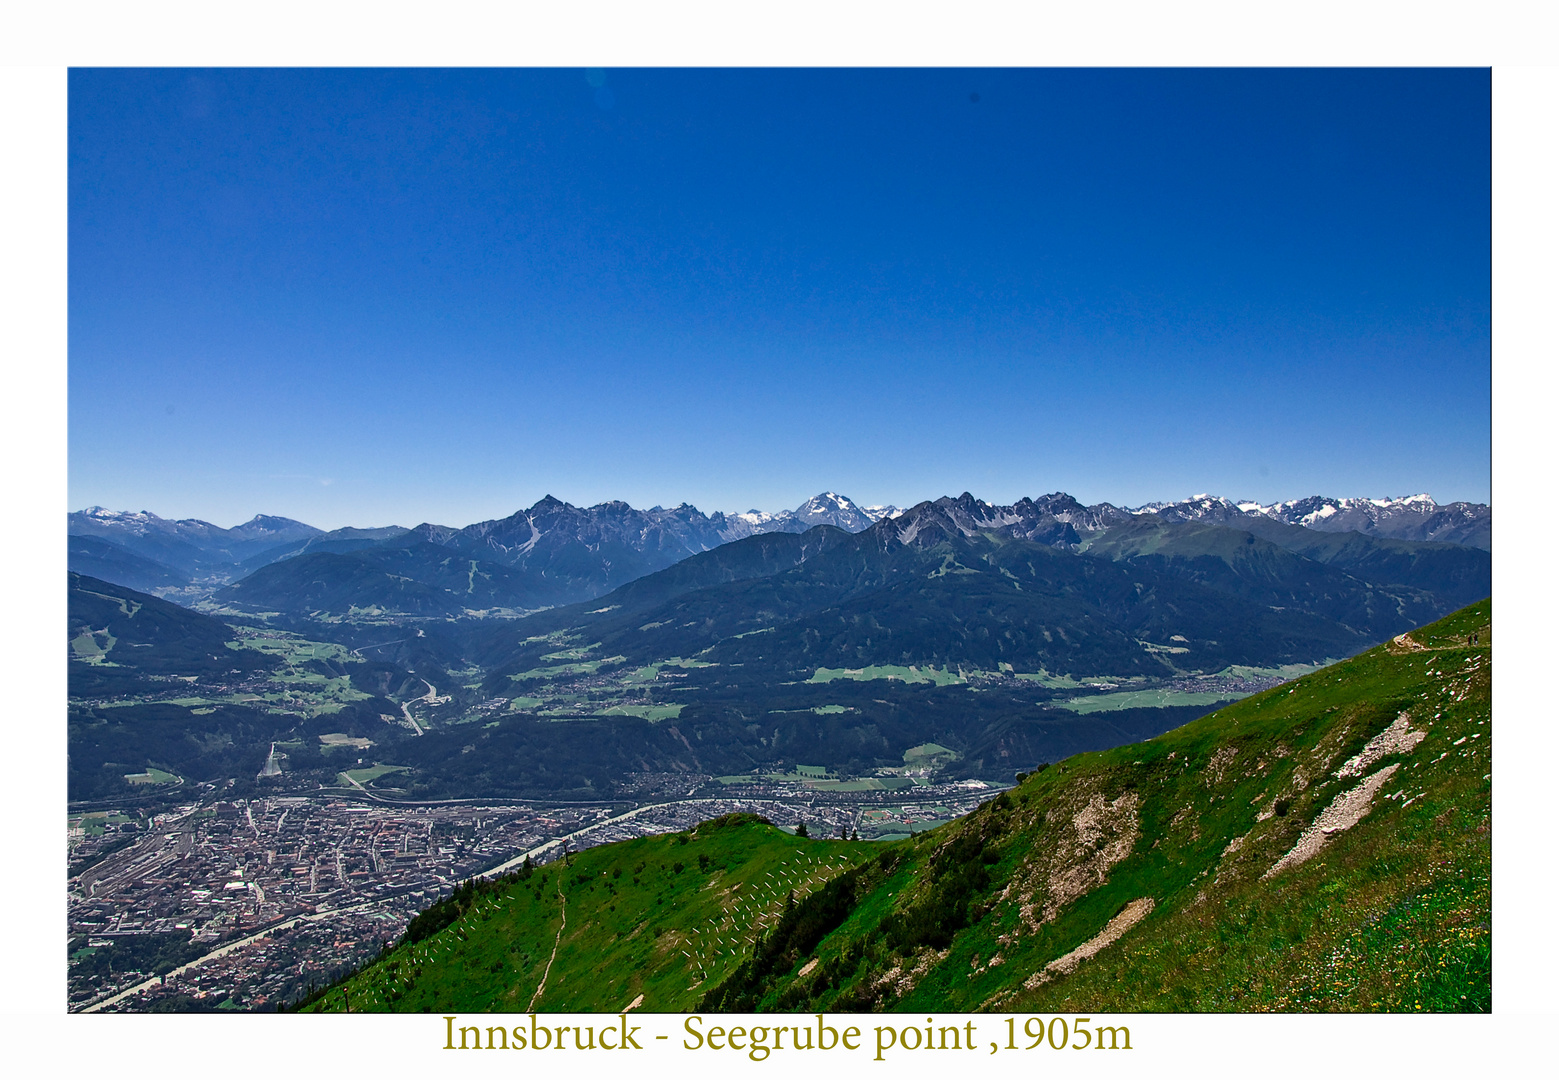 The view of Innsbruck at 1905m